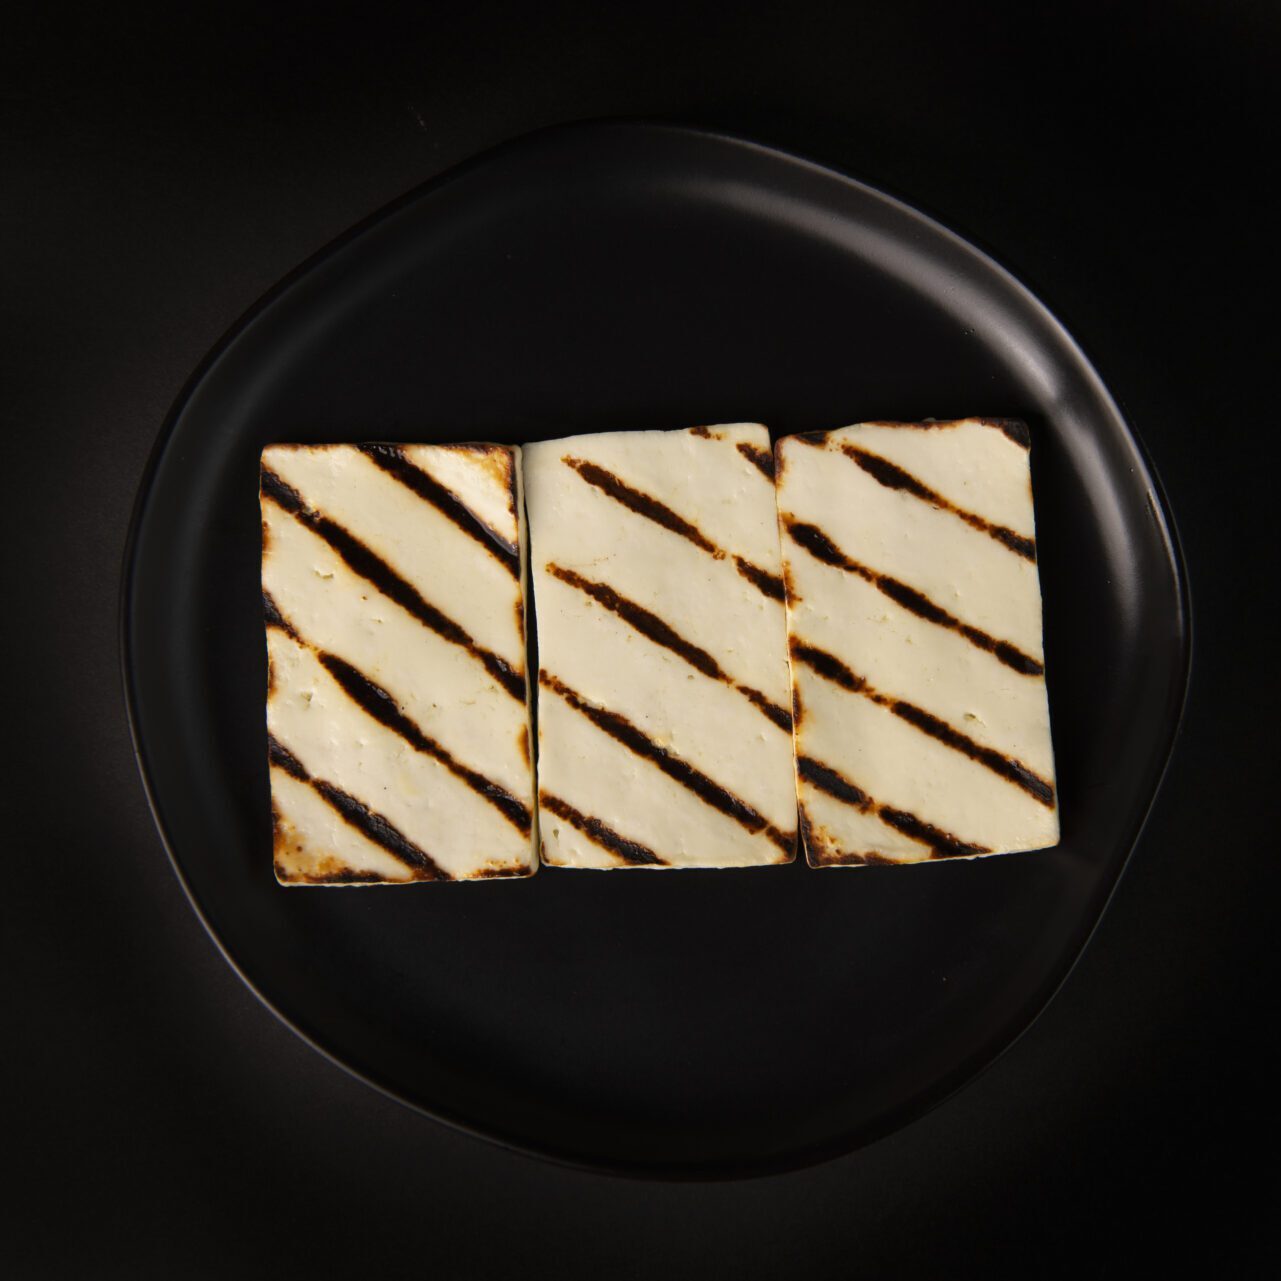 Three pieces of food on a black plate.